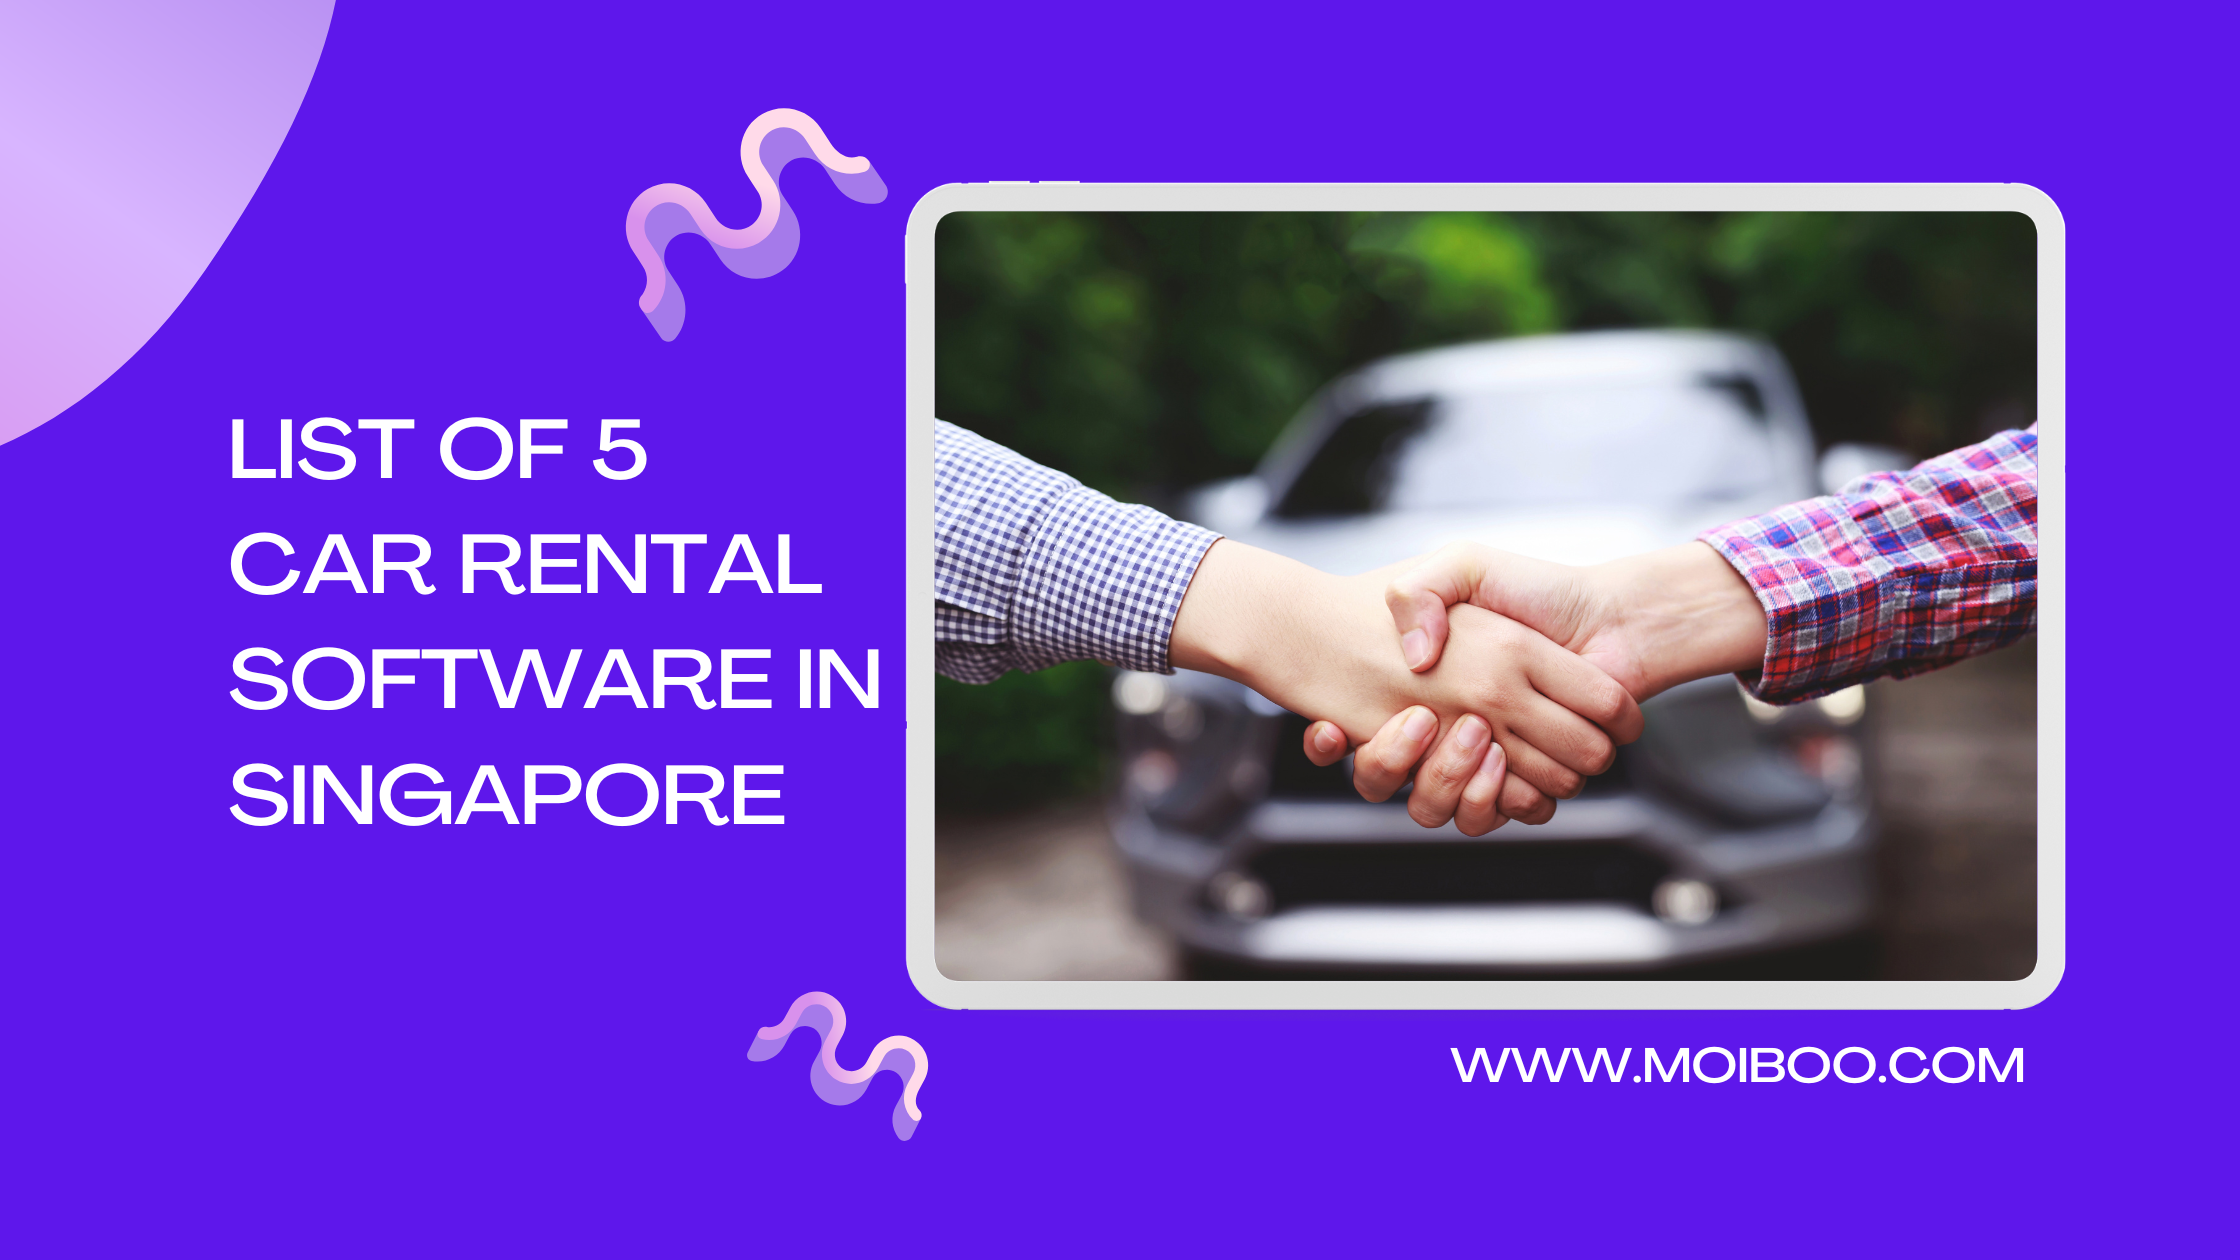 List of 5 Car Rental Software in Singapore